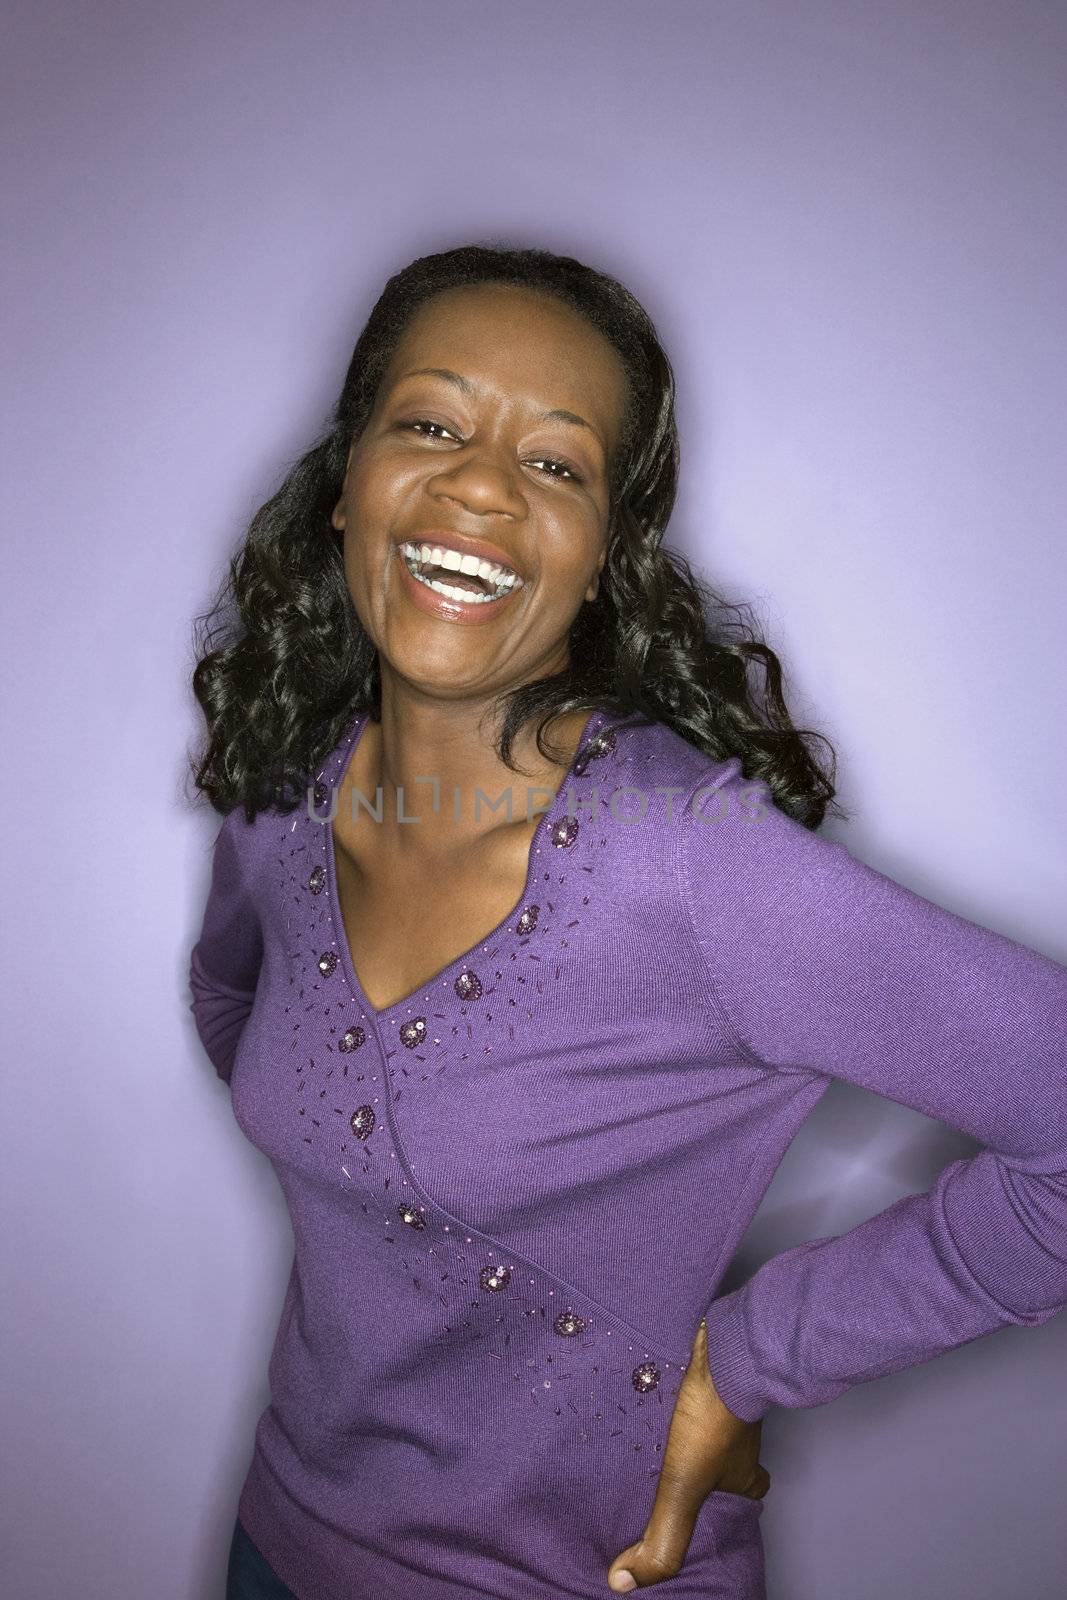 Portrait of laughing mid-adult African-American woman on purple background.